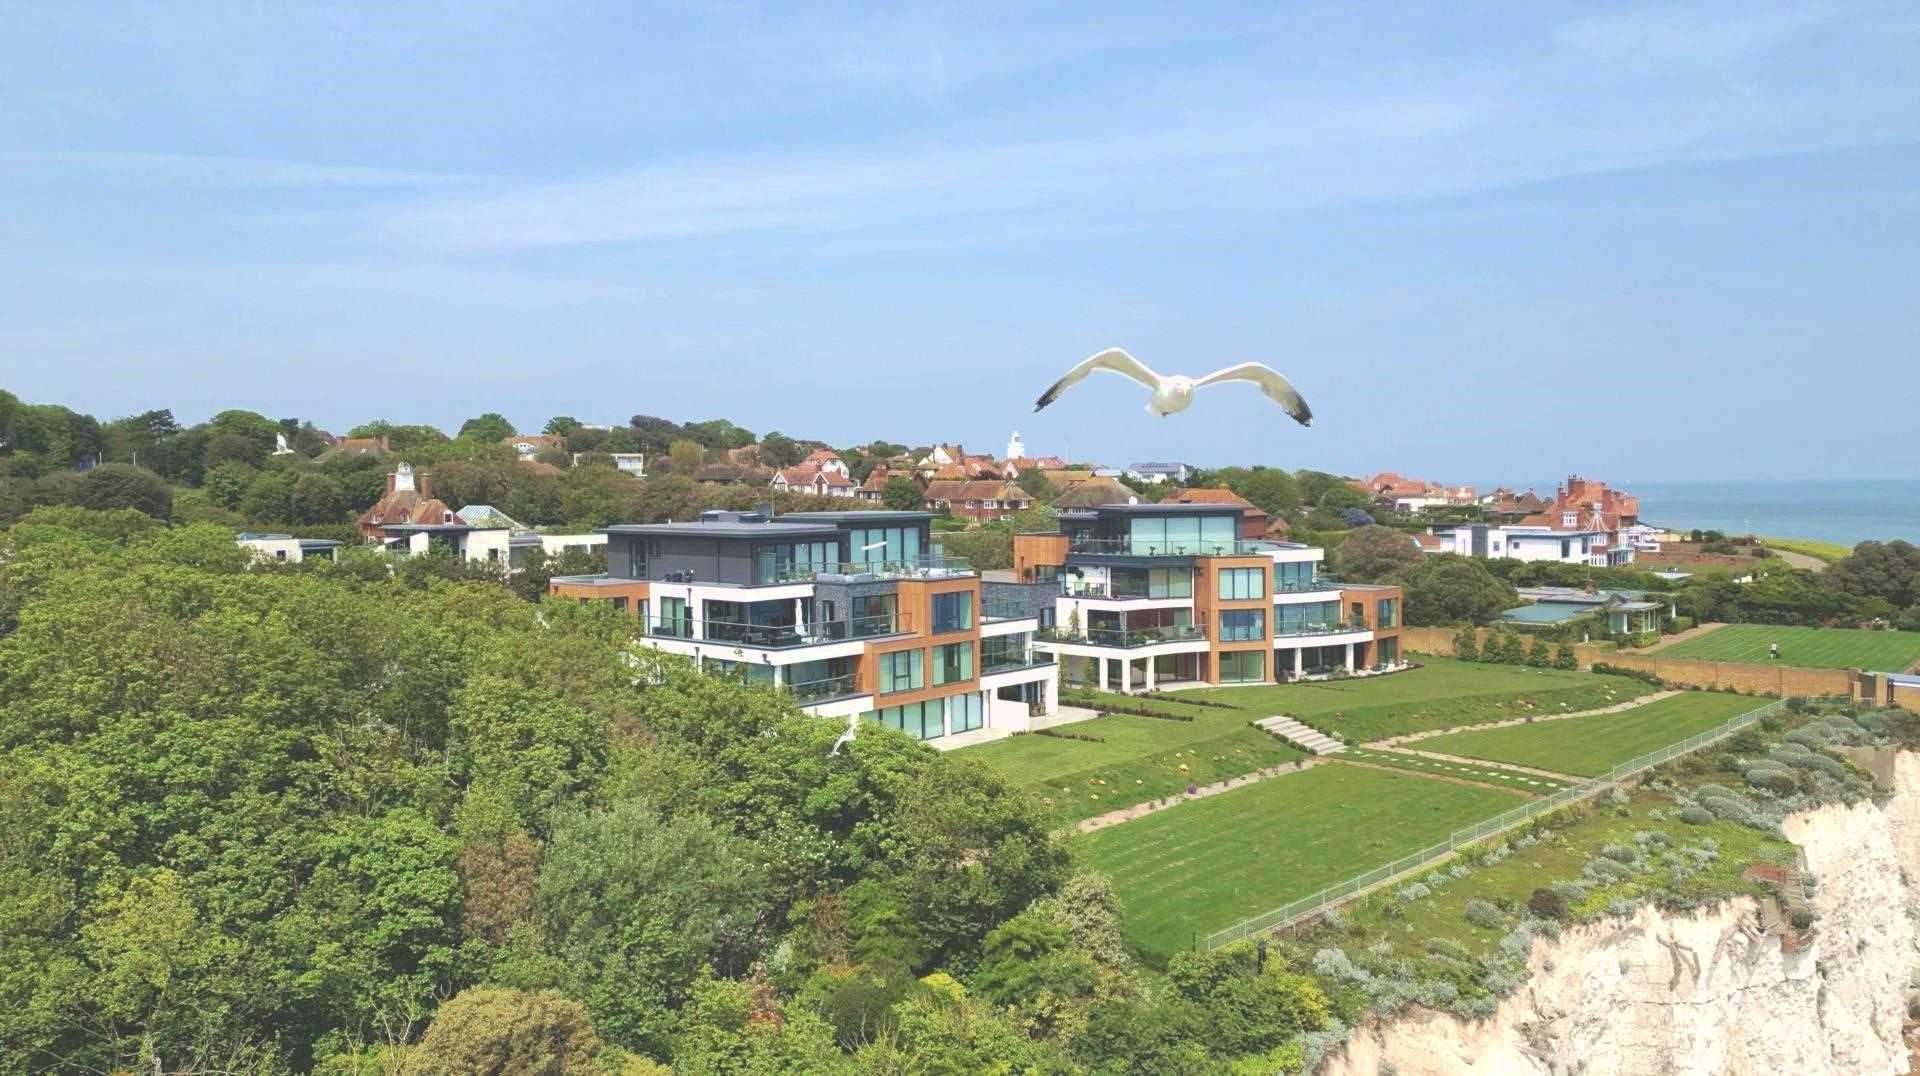 It has three bedrooms, a high-spec kitchen and views over the Thanet coast. Picture: Homeland Estates